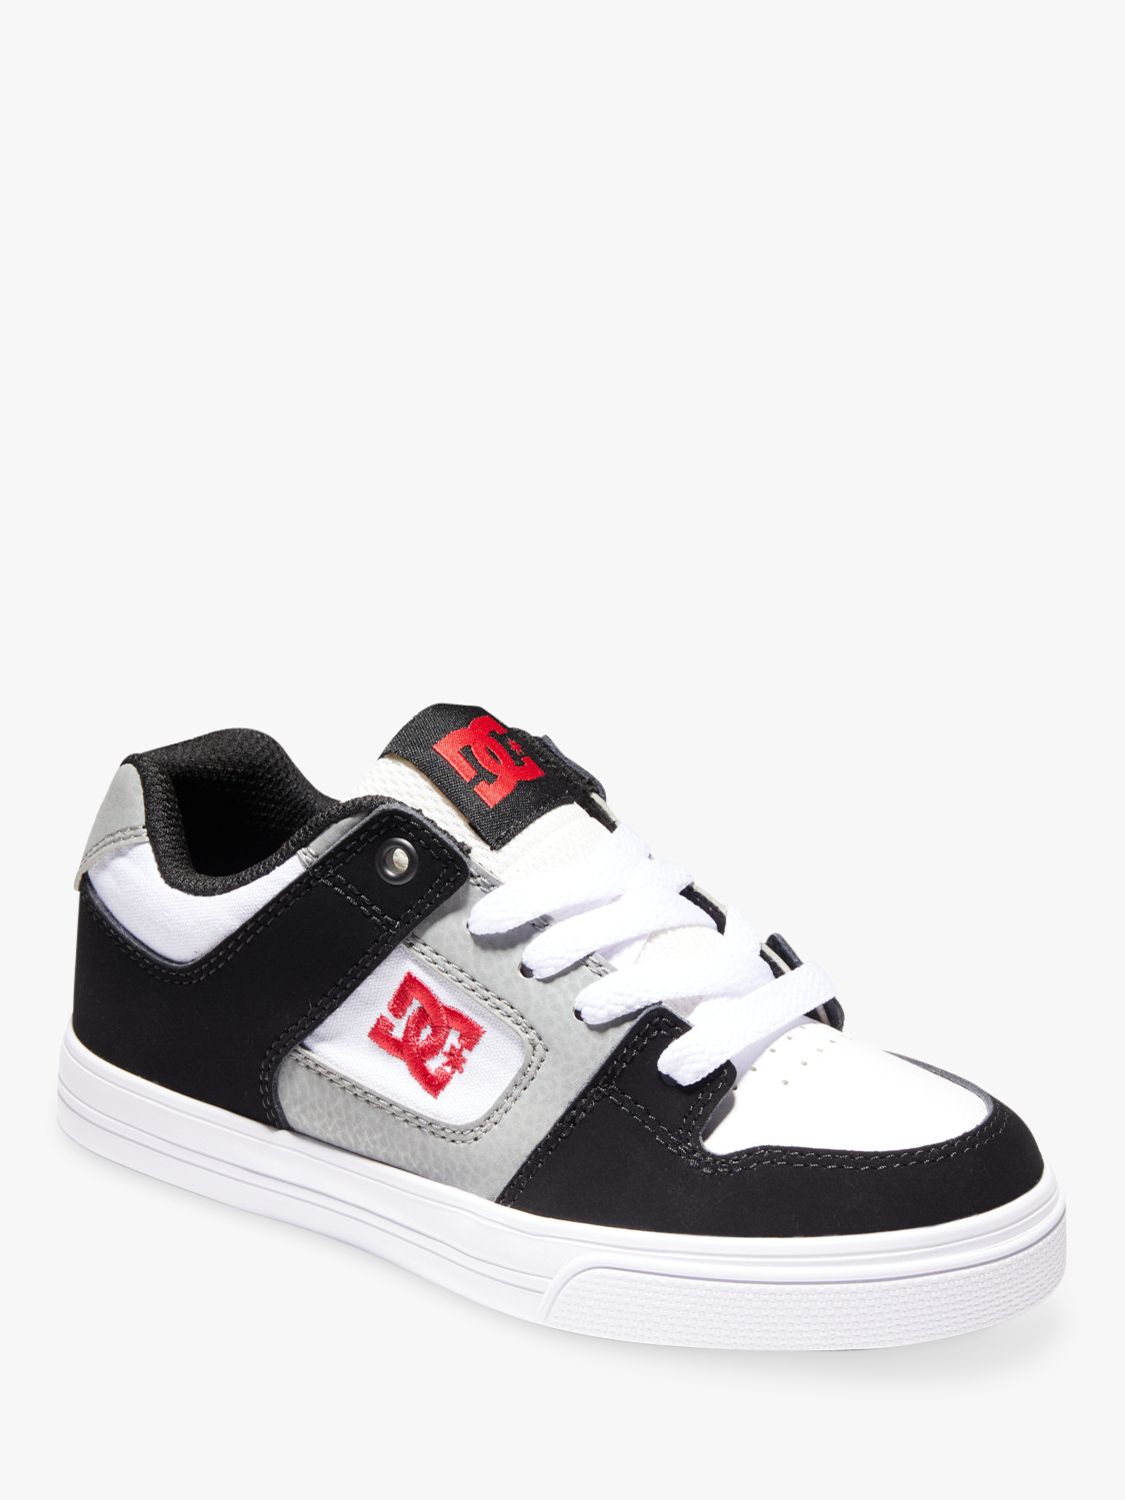 DC Shoes Kids' Pure Leather Lace Up Trainers, White/Black/Red, 2